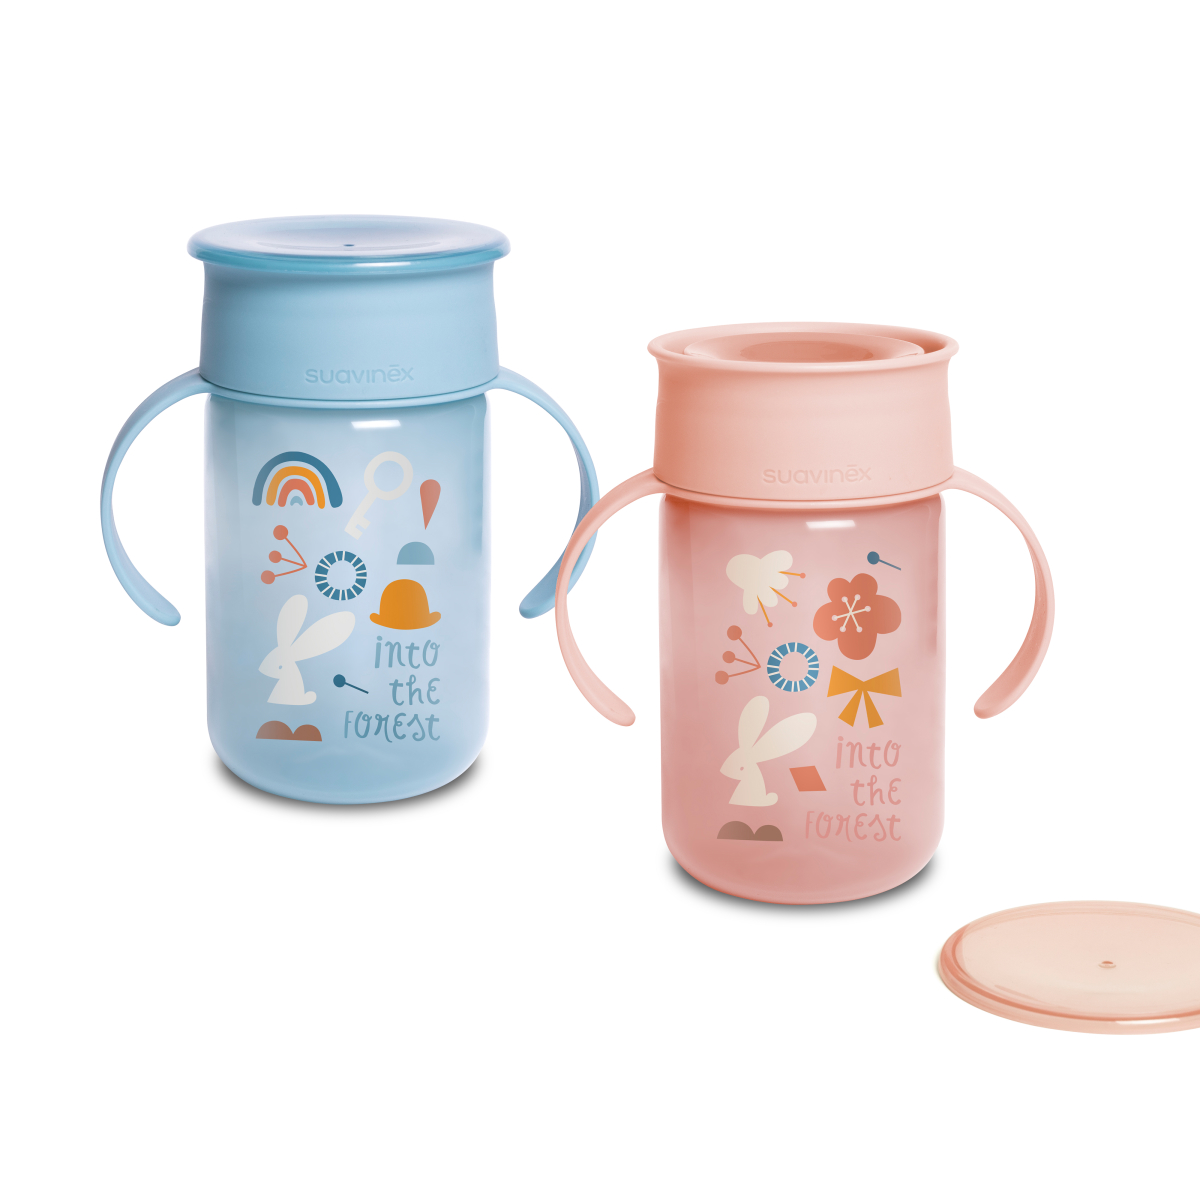 360º Trainer cup - 340ml (trainer cup with non-spill disc)